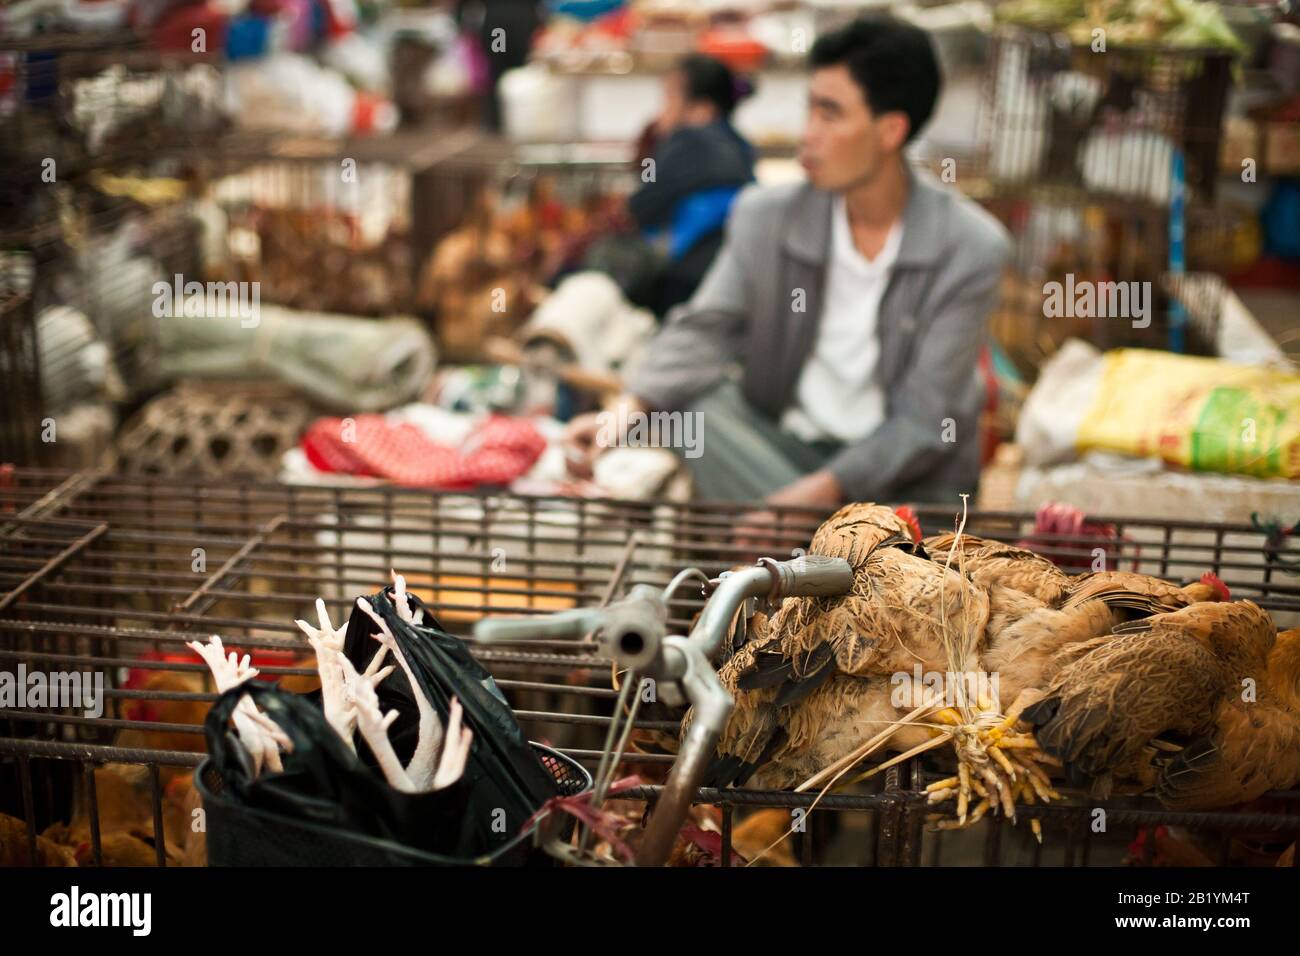 Street Market, with live animals, Guilin China Stock Photo